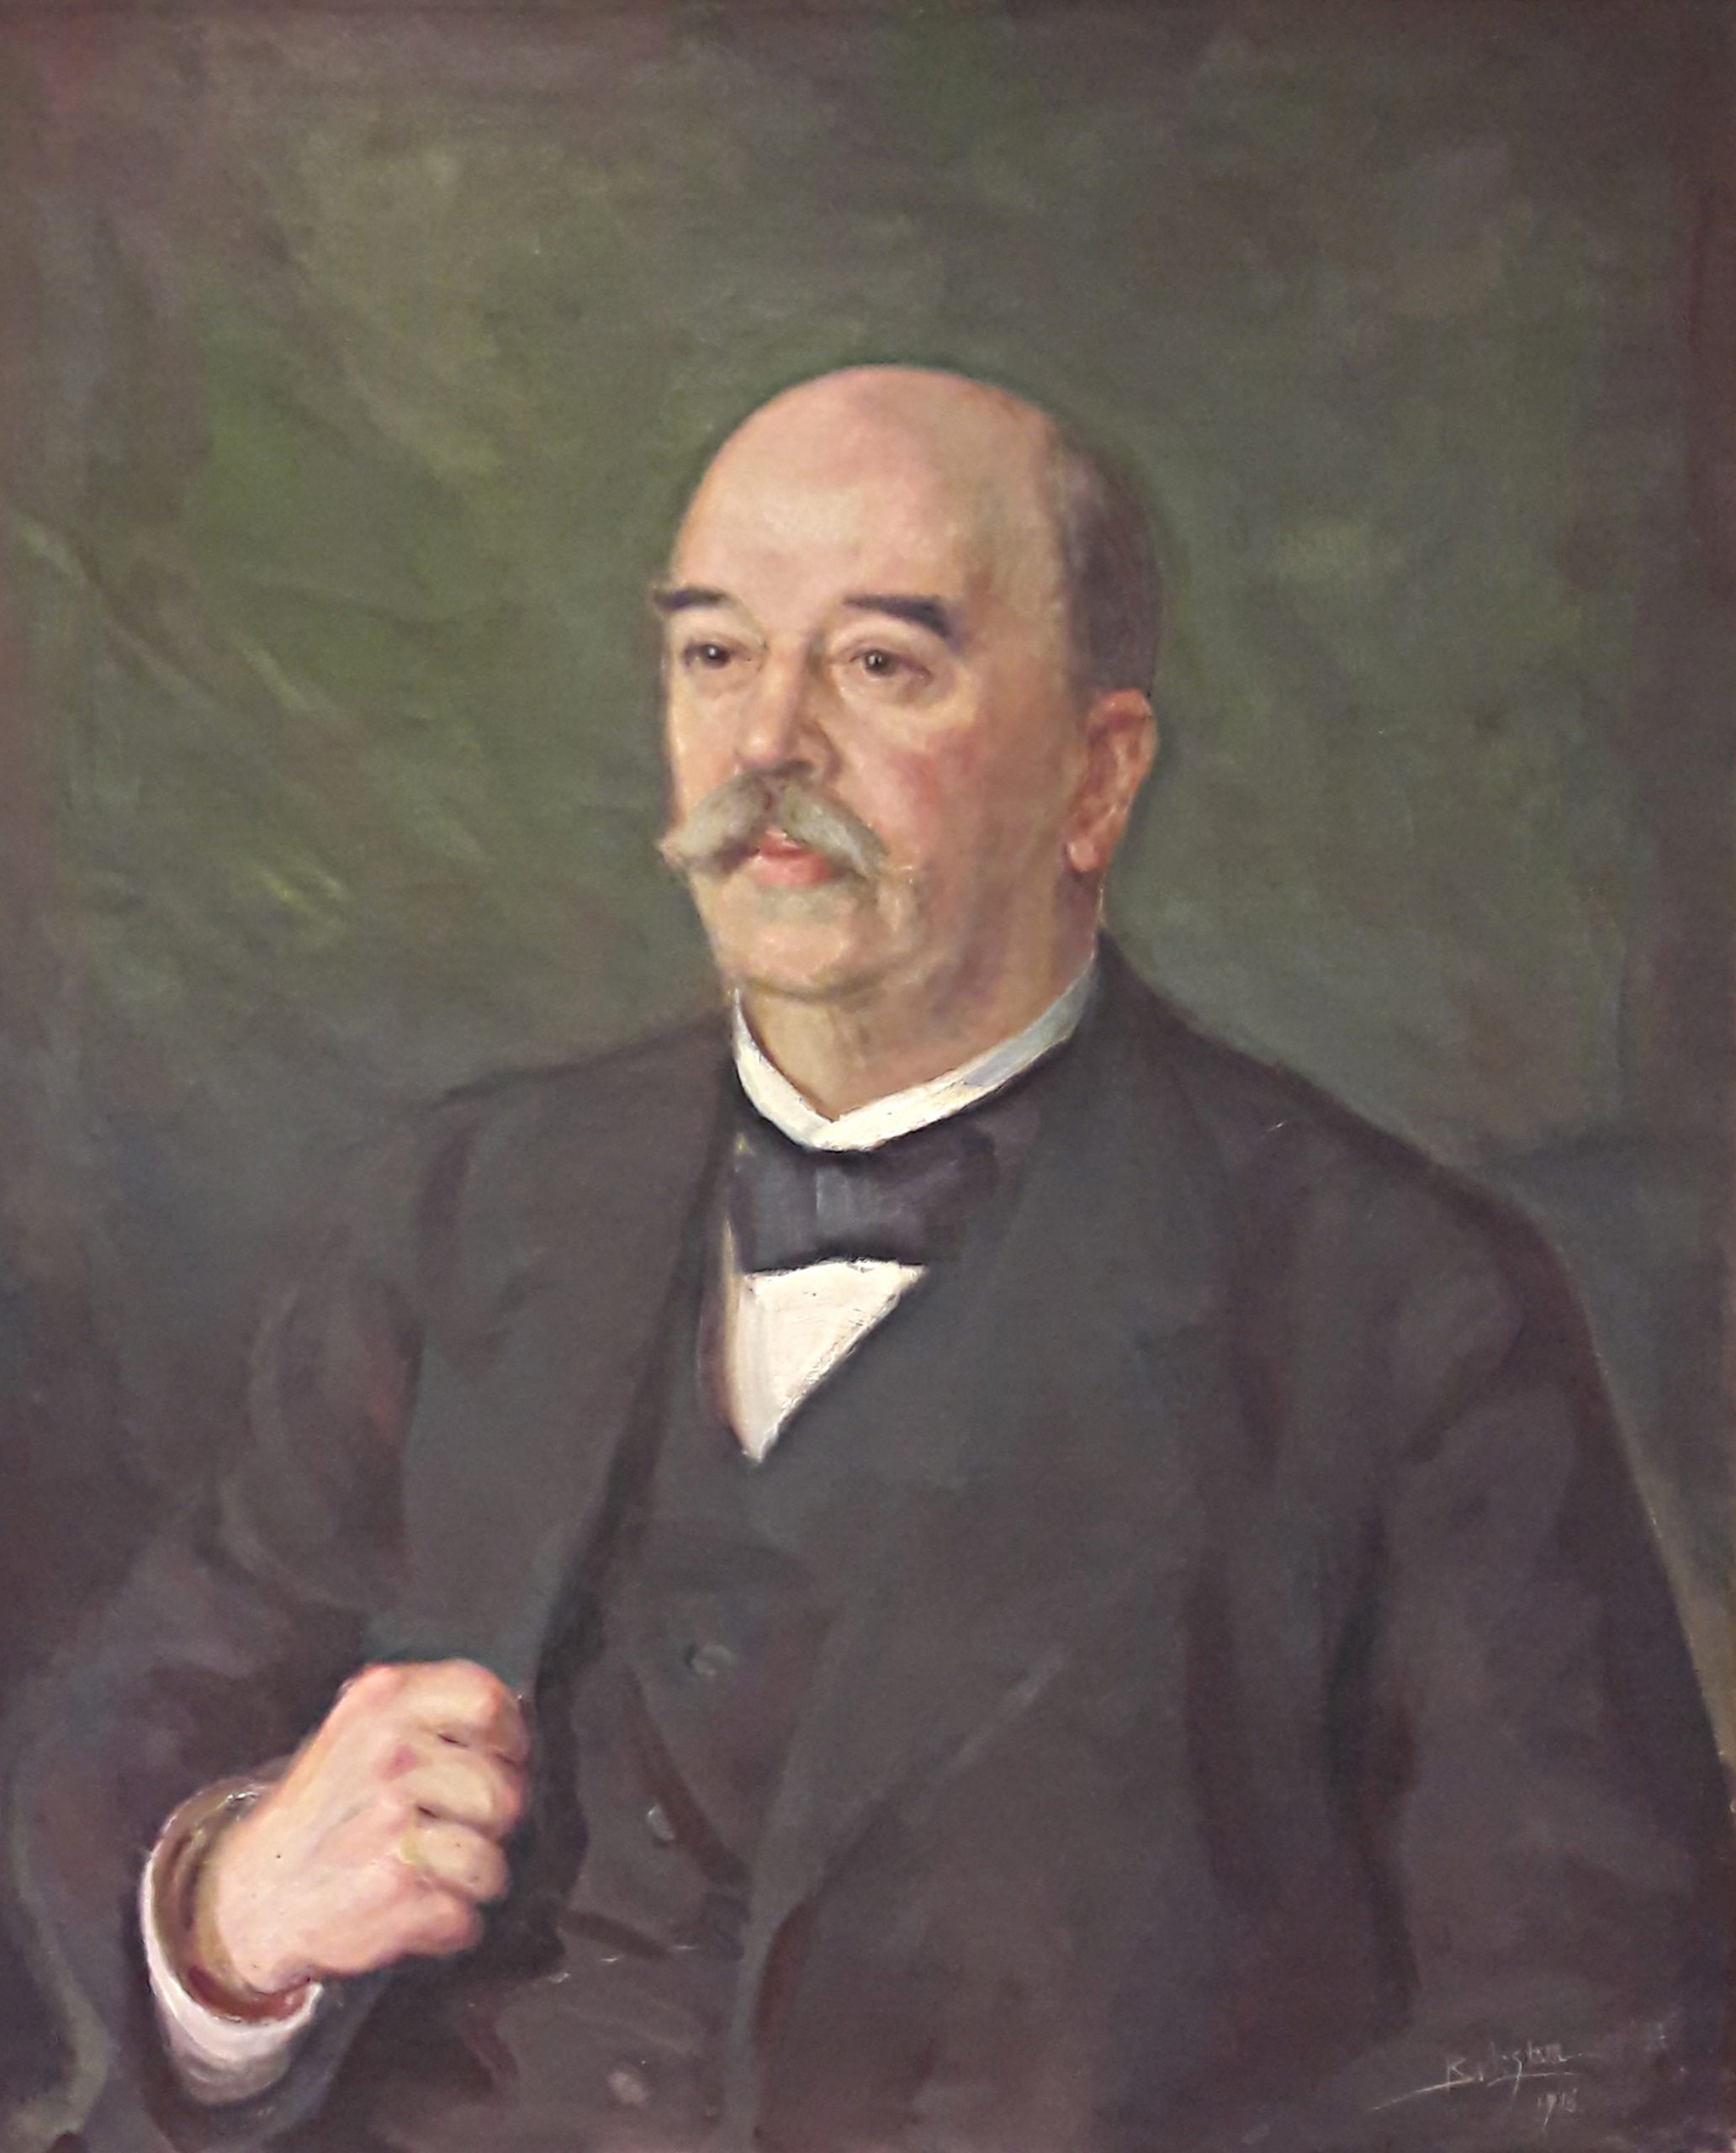 A half-body portrait of a man wearing a dark suit, white shirt and dark bow tie around his neck. He is holding the lapel of his suit jacket with one hand. He is partly bald and has a large moustache.